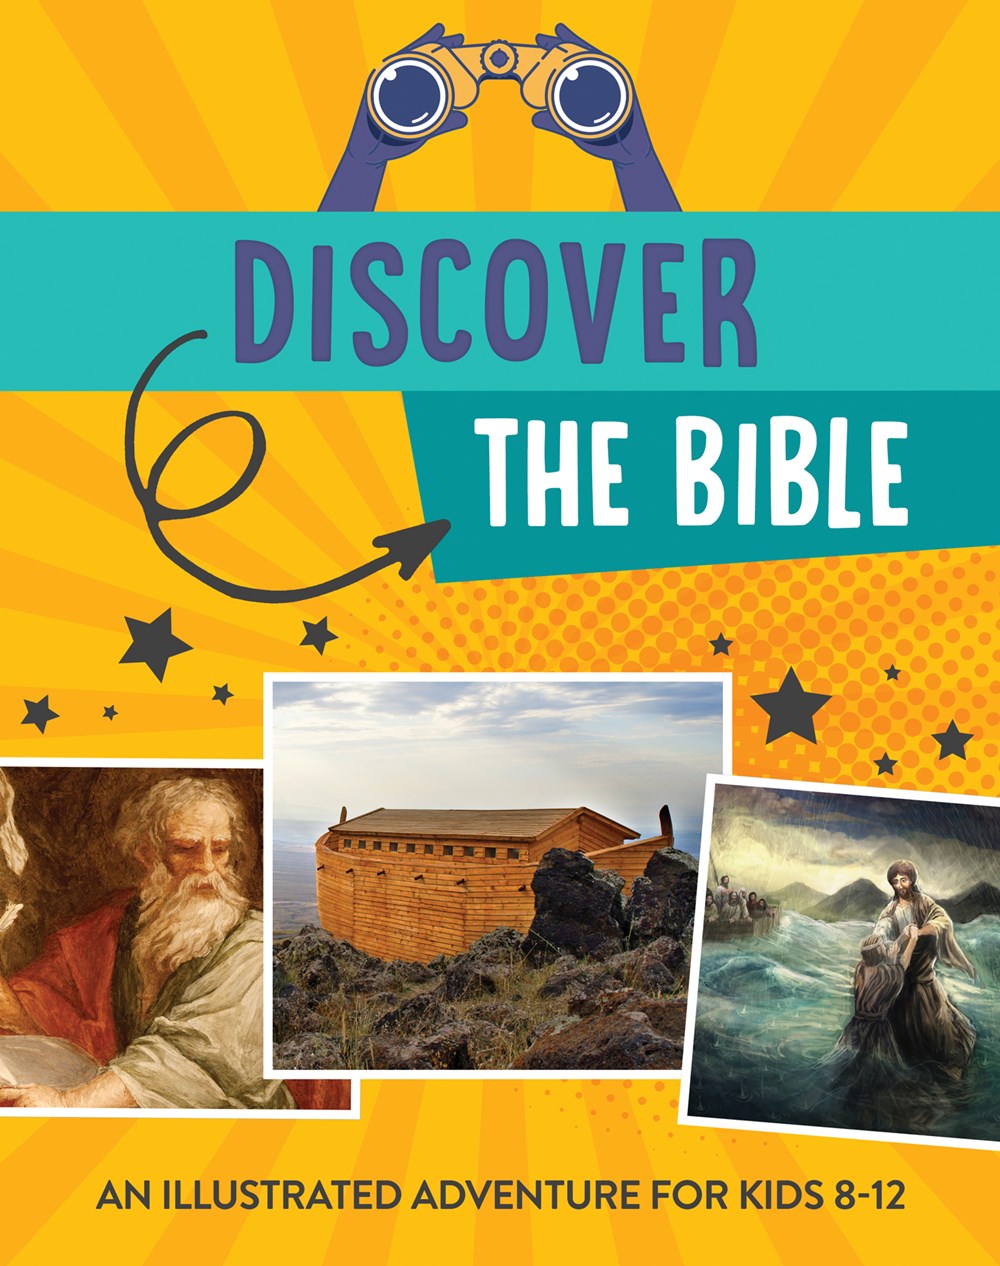 Discover the Bible - The Christian Gift Company